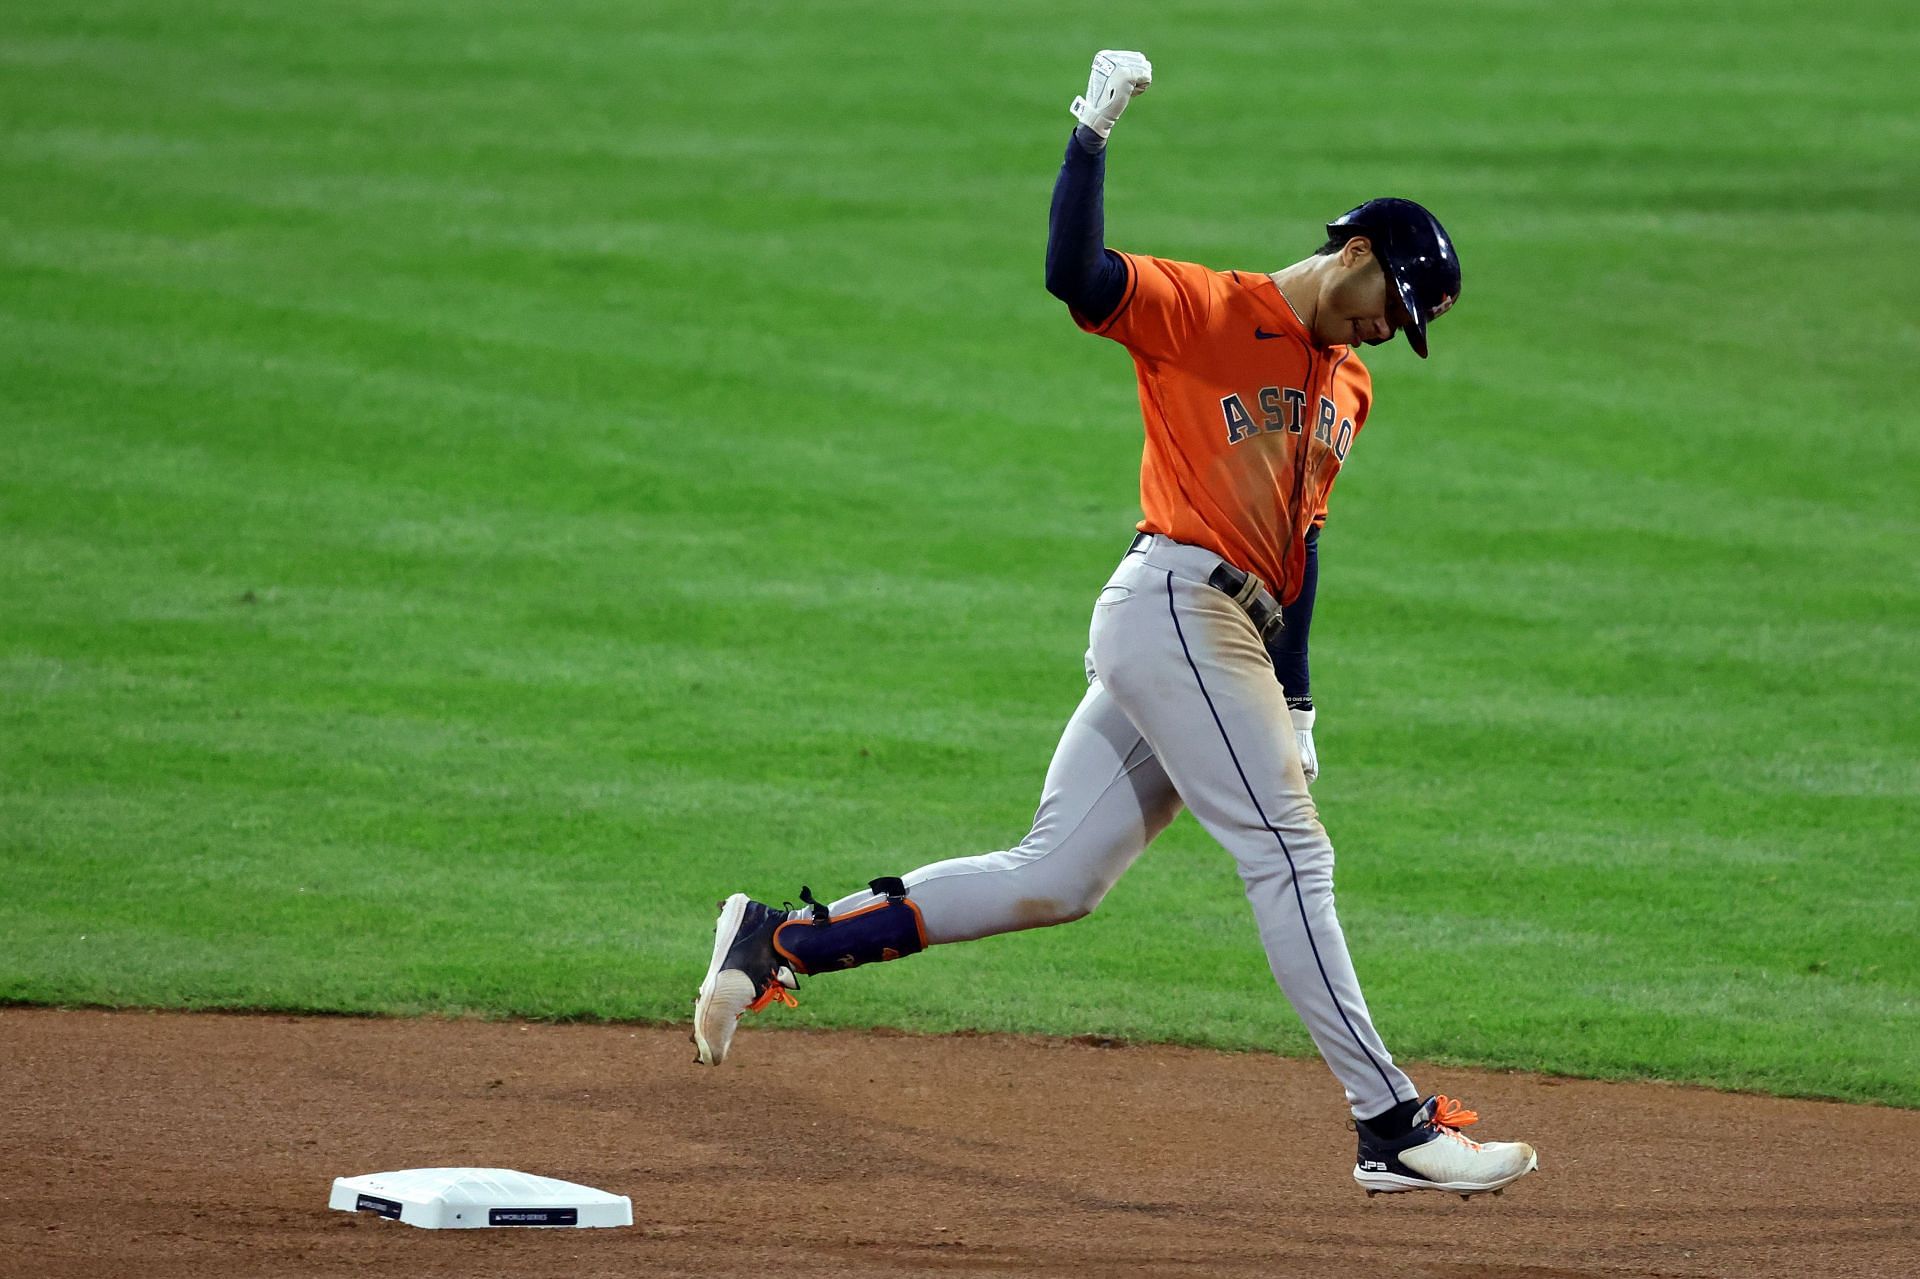 Carlos Correa's role in training Jeremy Peña to be his Astros